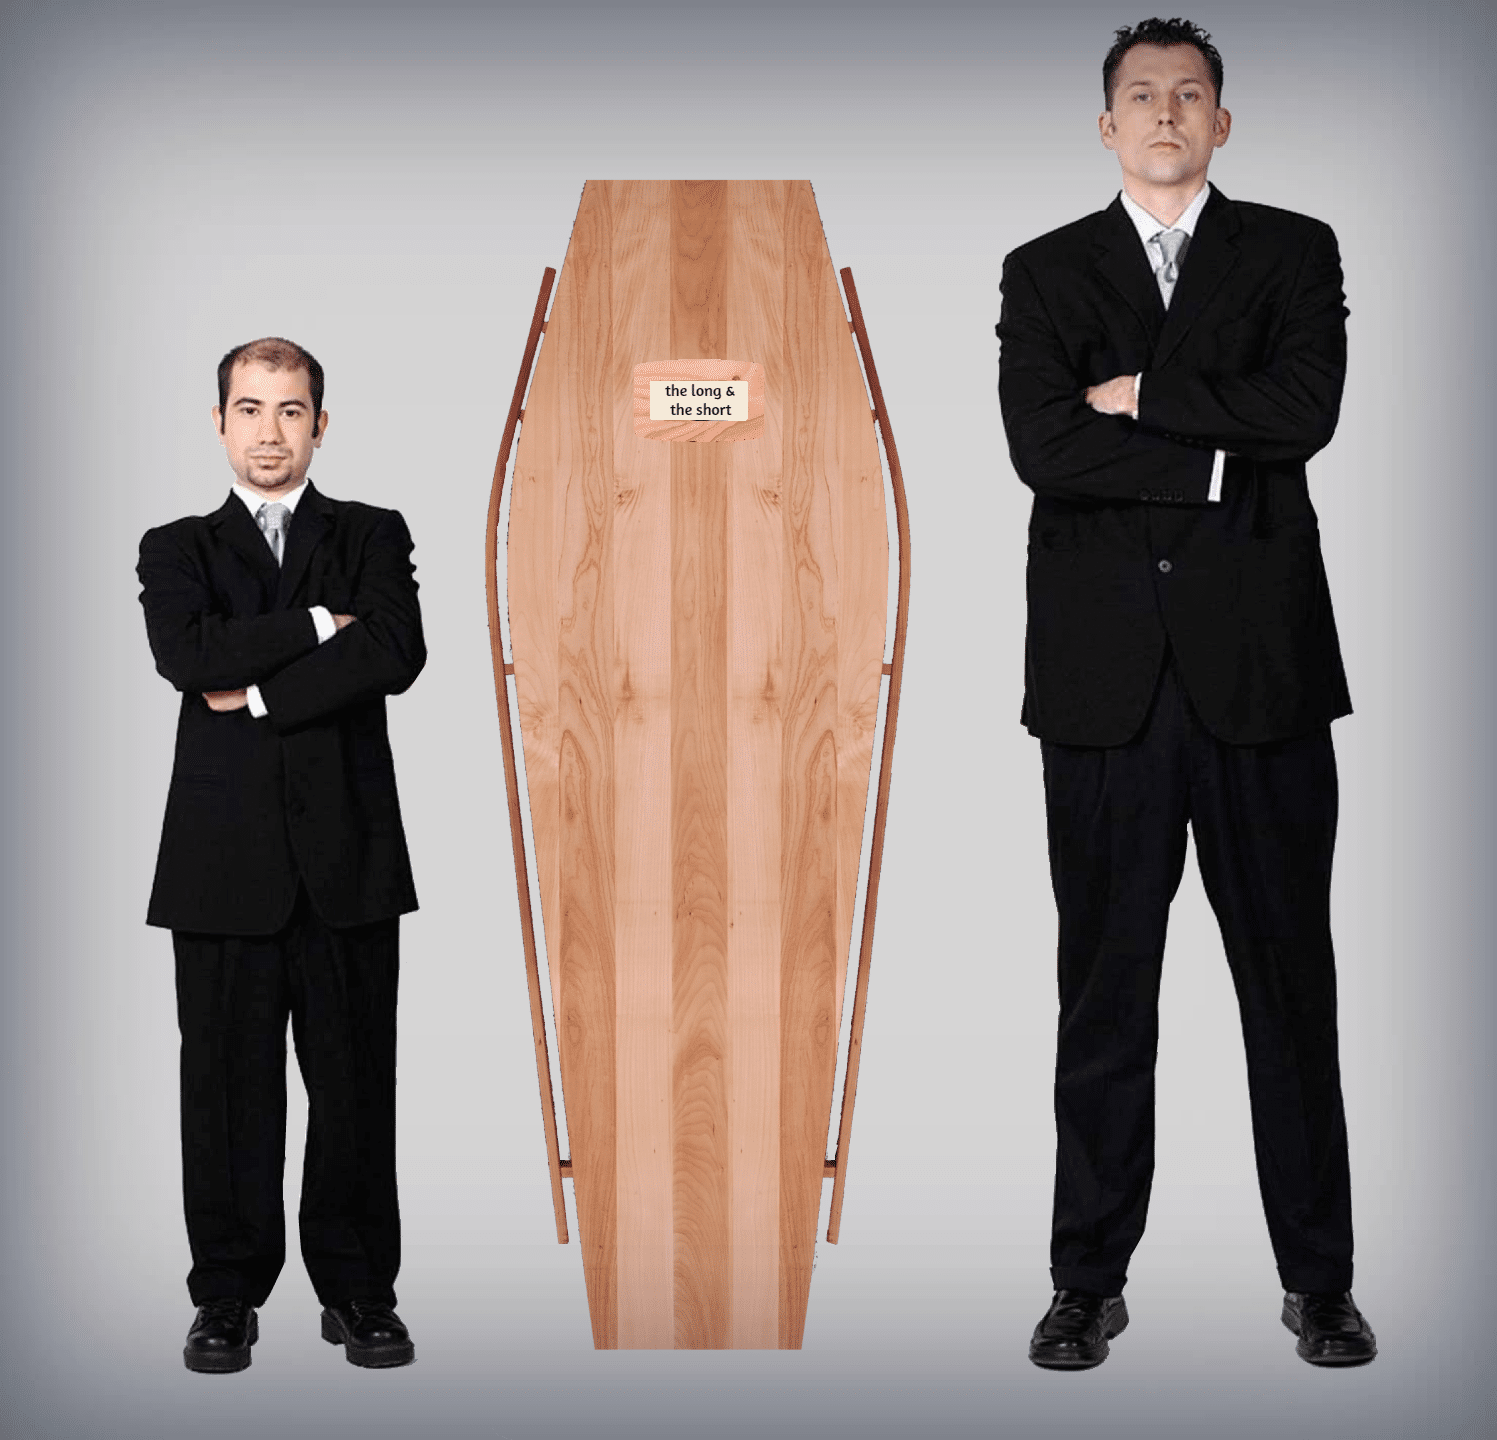 long and short of it casket options